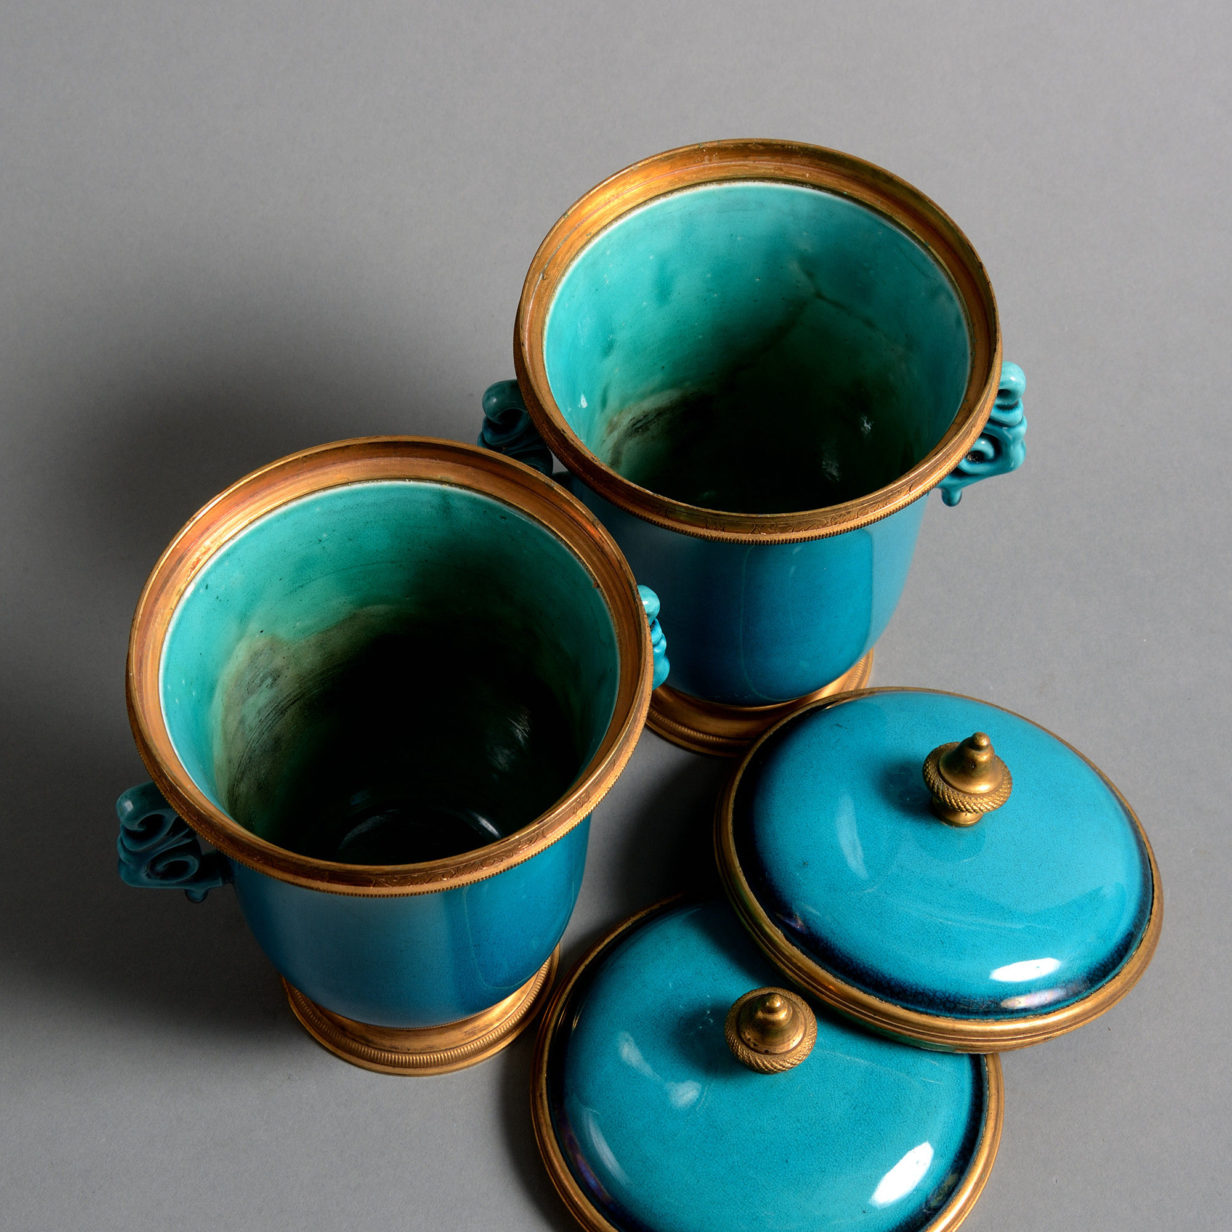 A pair of 19th century ormolu mounted turquoise porcelain vases by samson